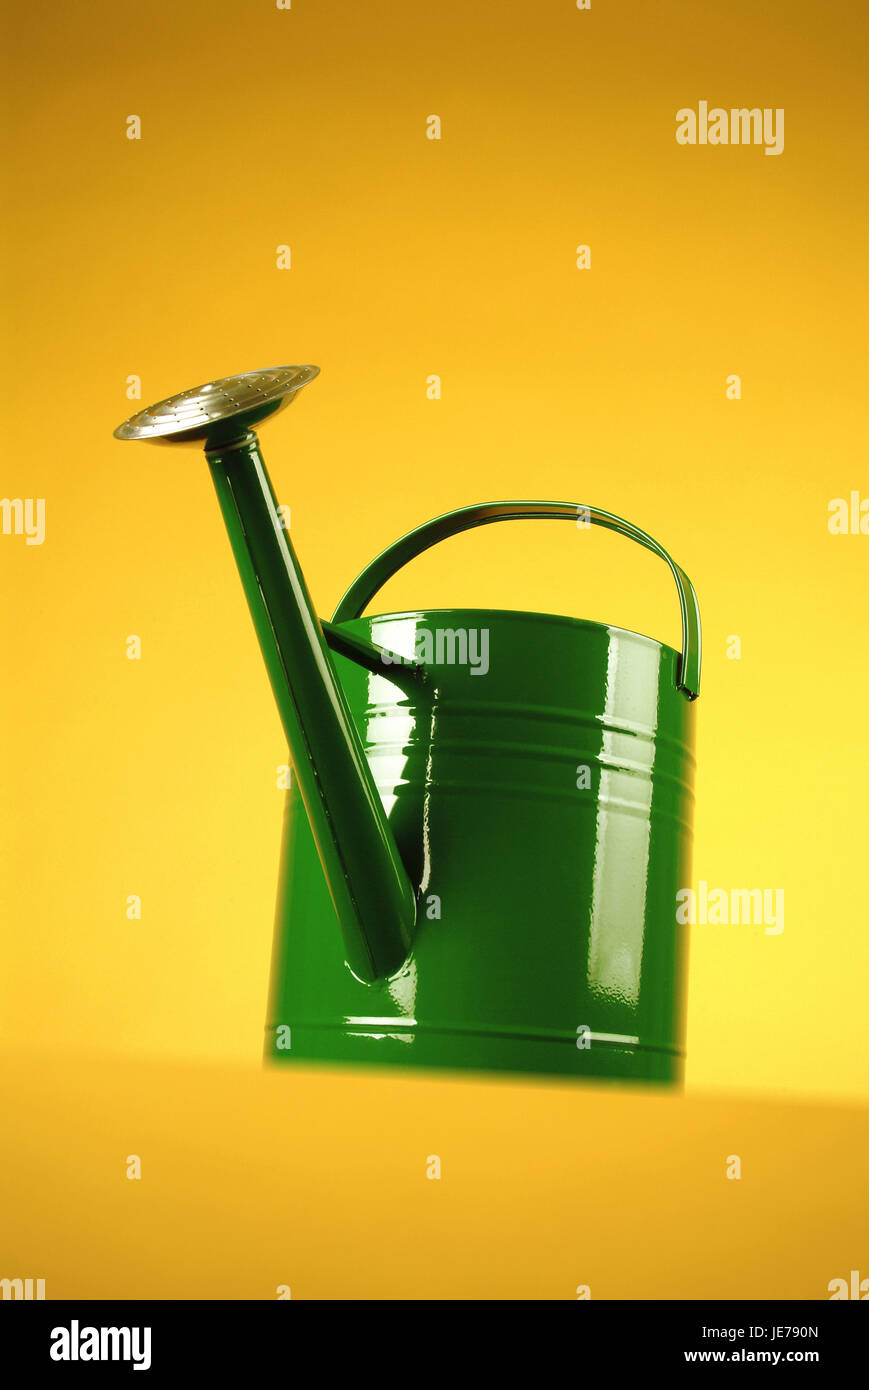 Green watering can from tin, Stock Photo